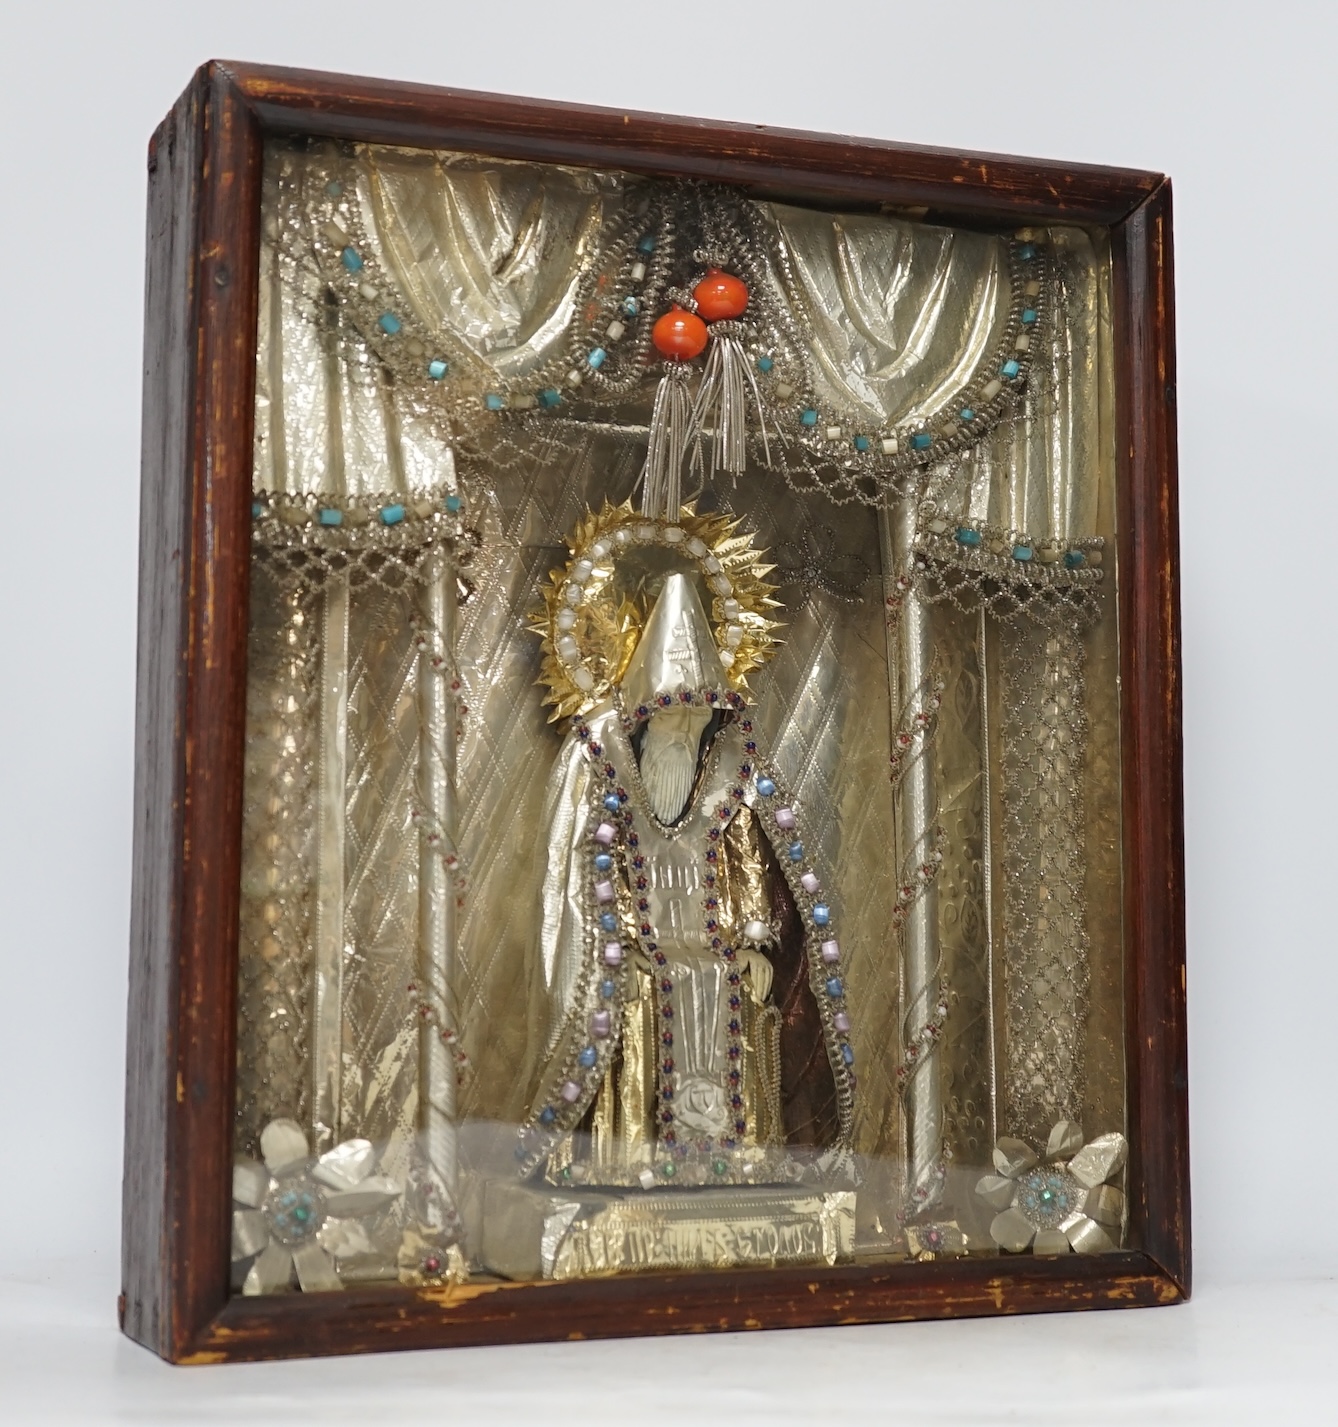 A Russian icon / figurative diorama, ‘Old Believers’, decorated with mixed metals and coloured beadwork, 33cm wide x 37cm high